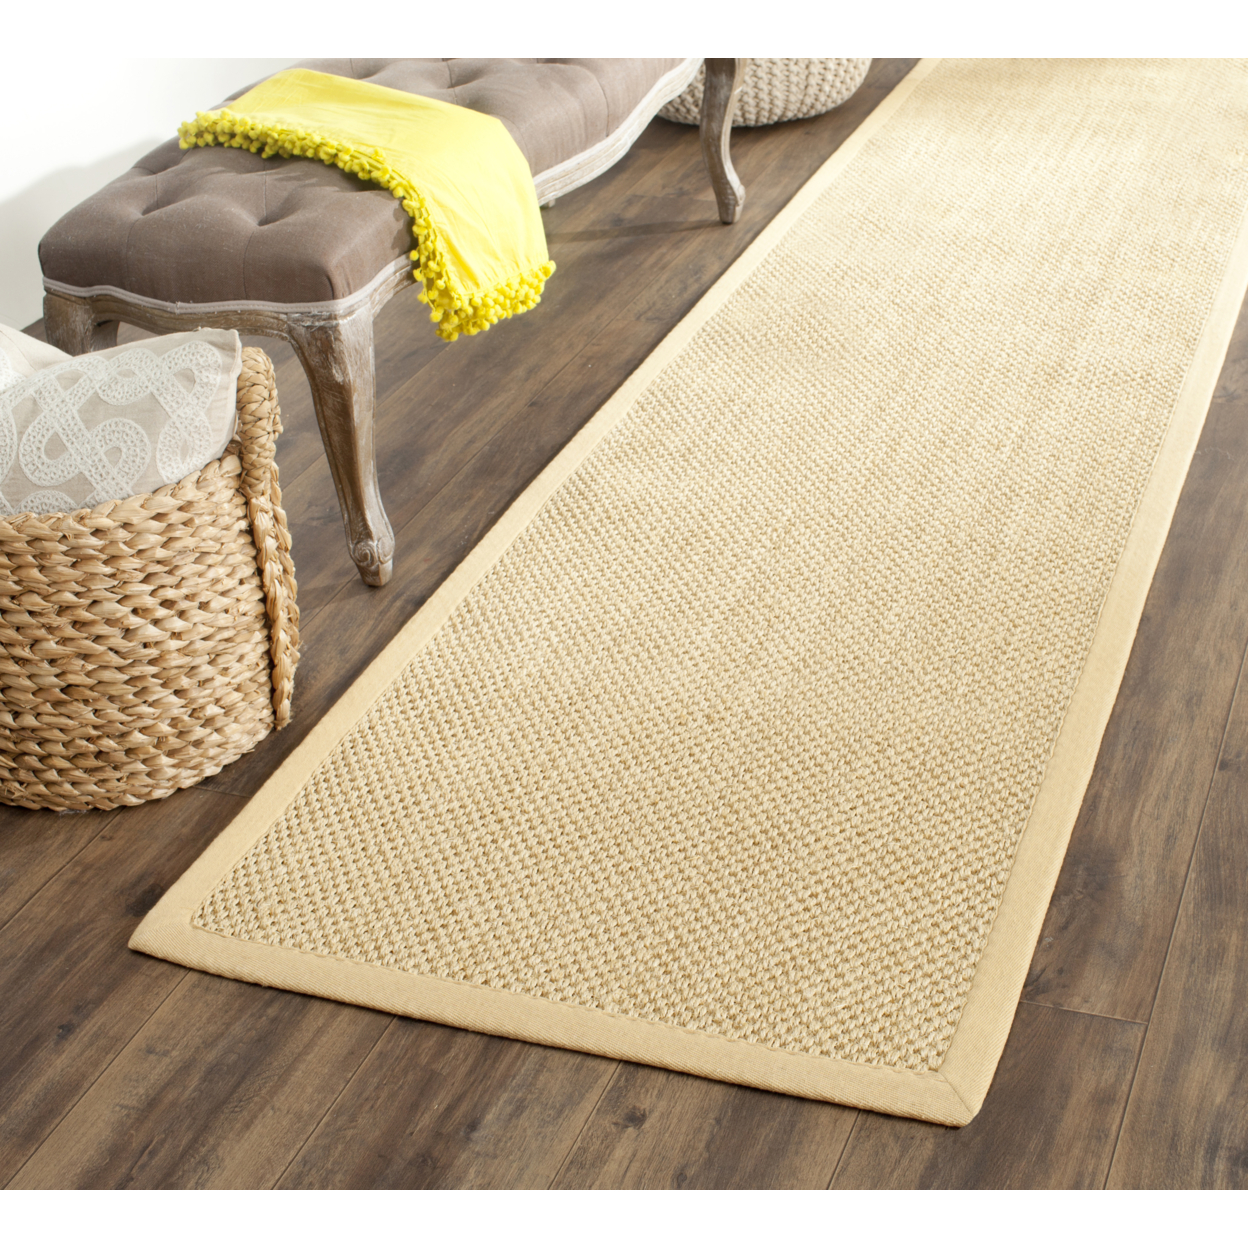 SAFAVIEH Natural Fiber Collection NF443A Maize/Wheat Rug - 2' 6 X 18'